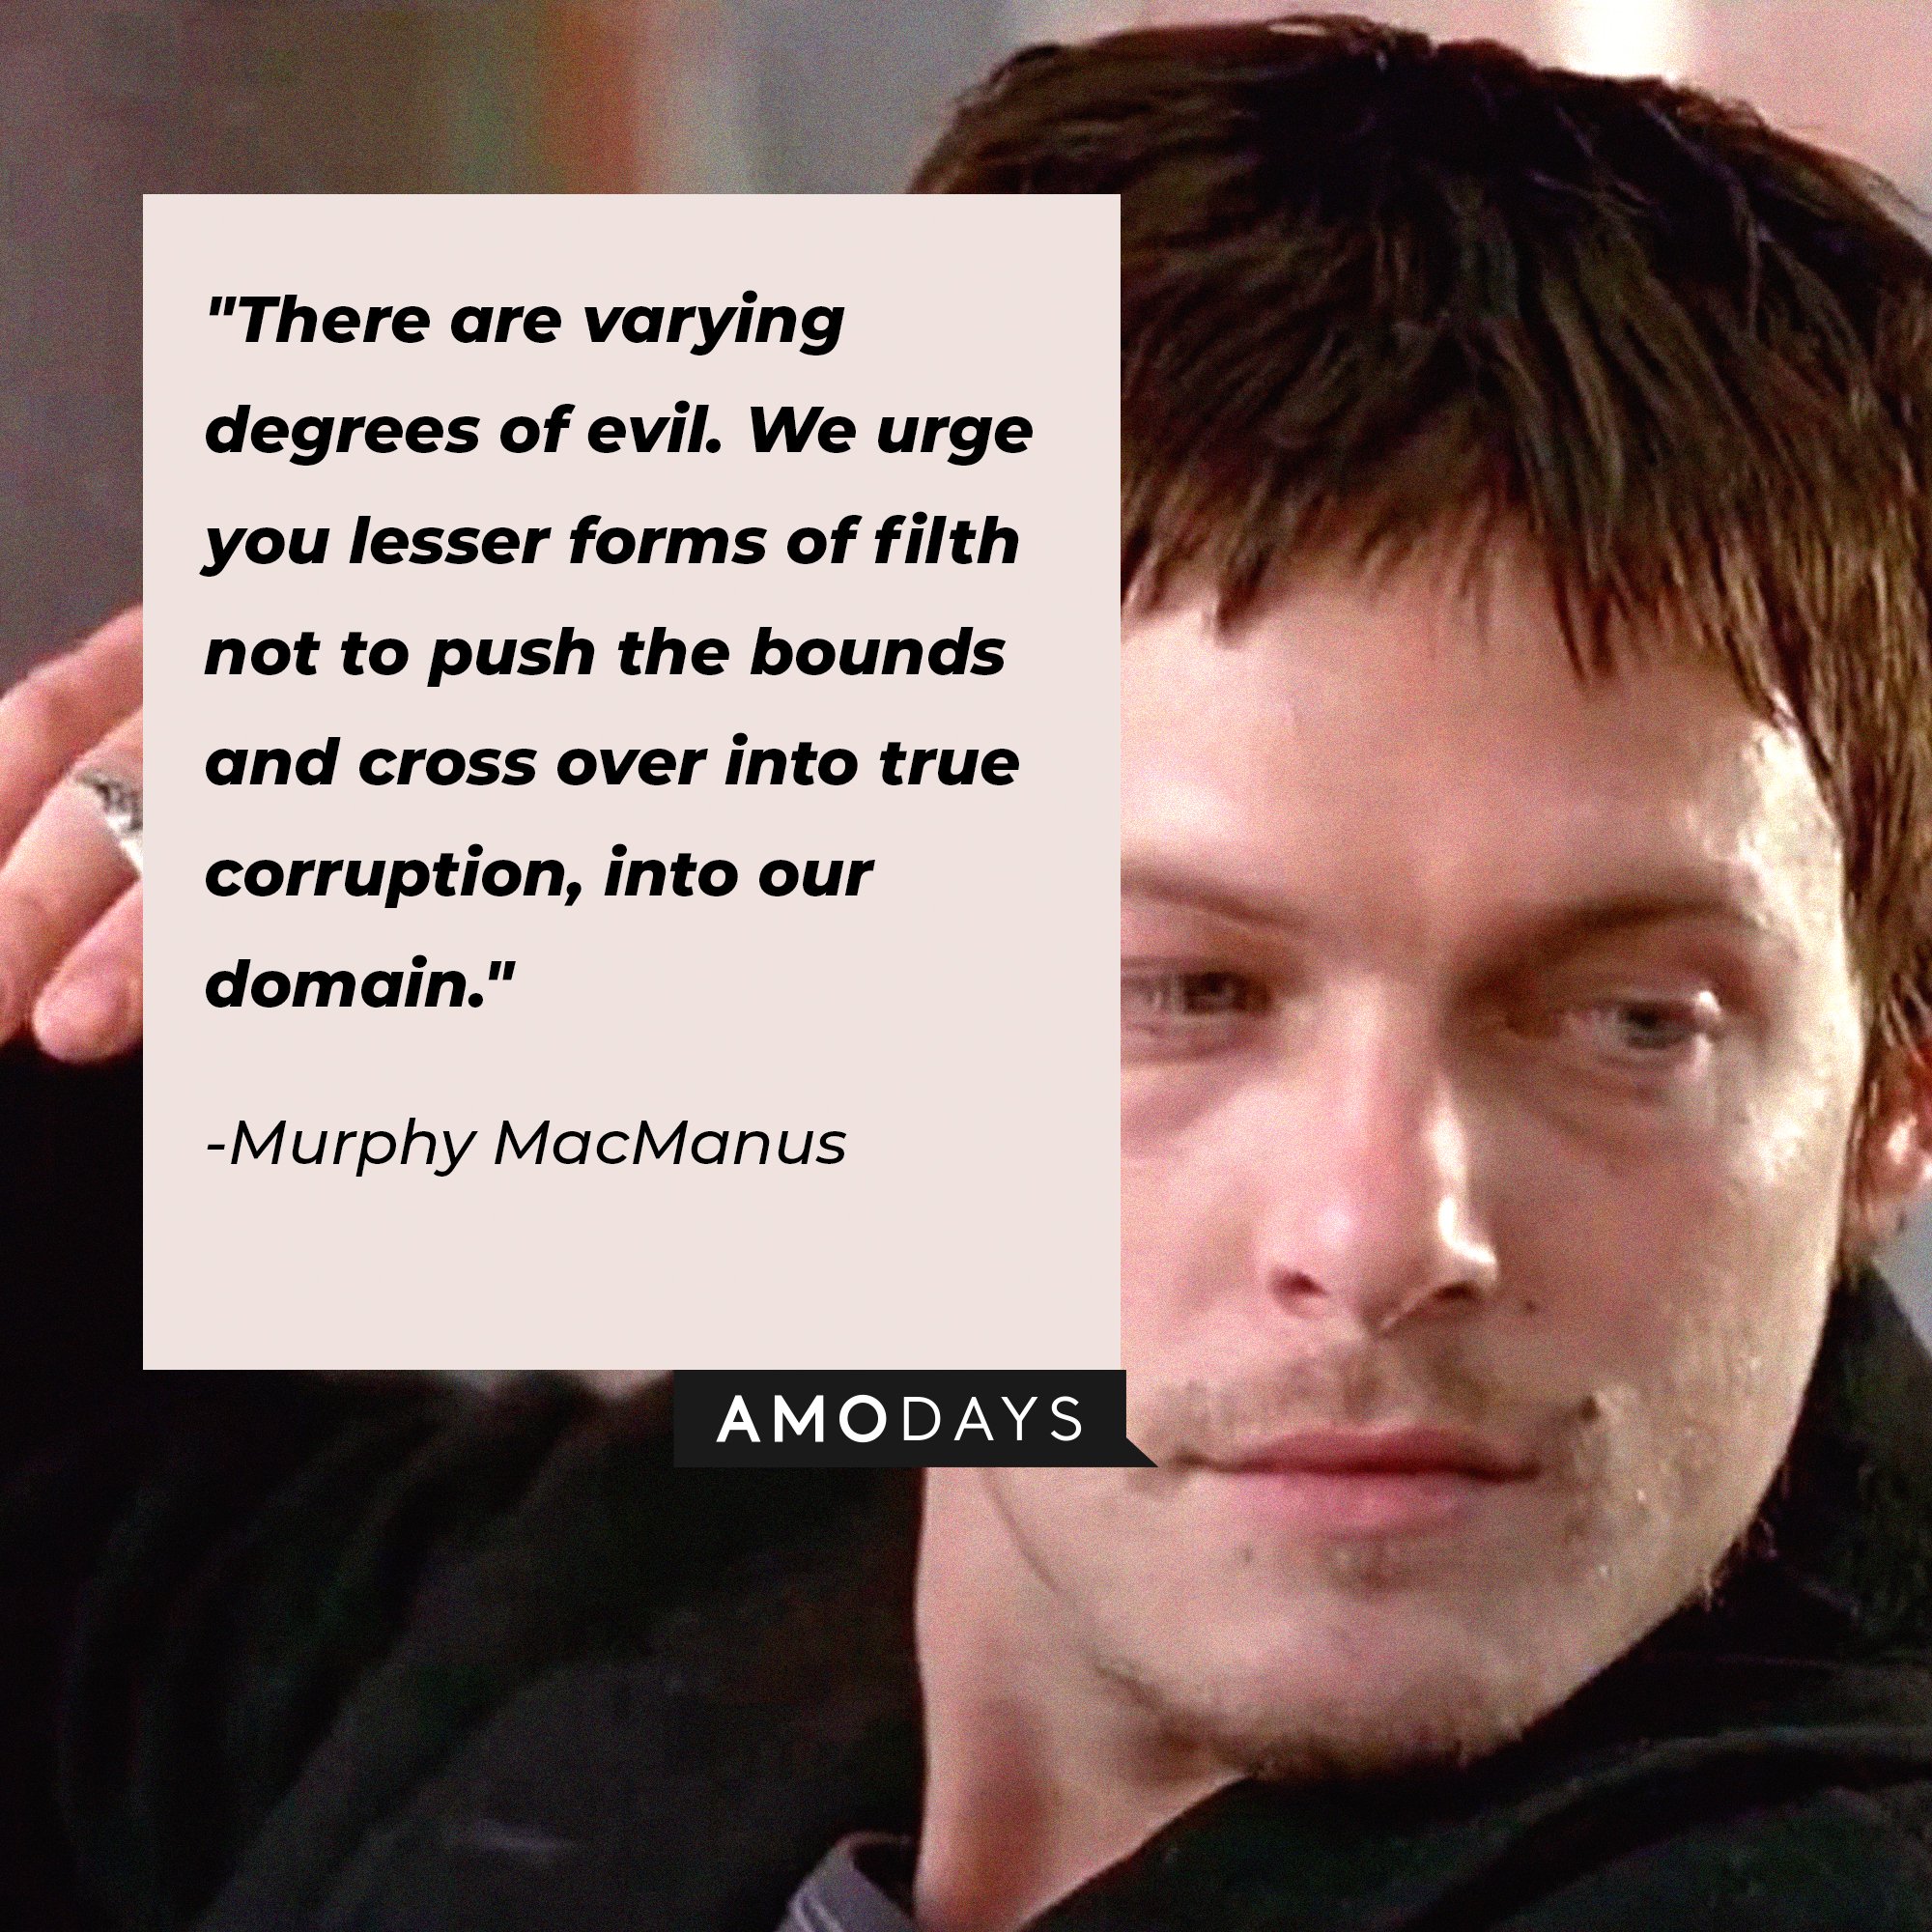 Murphy MacManus' quote: "There are varying degrees of evil. We urge you lesser forms of filth not to push the bounds and cross over into true corruption, into our domain." | Image: AmoDays